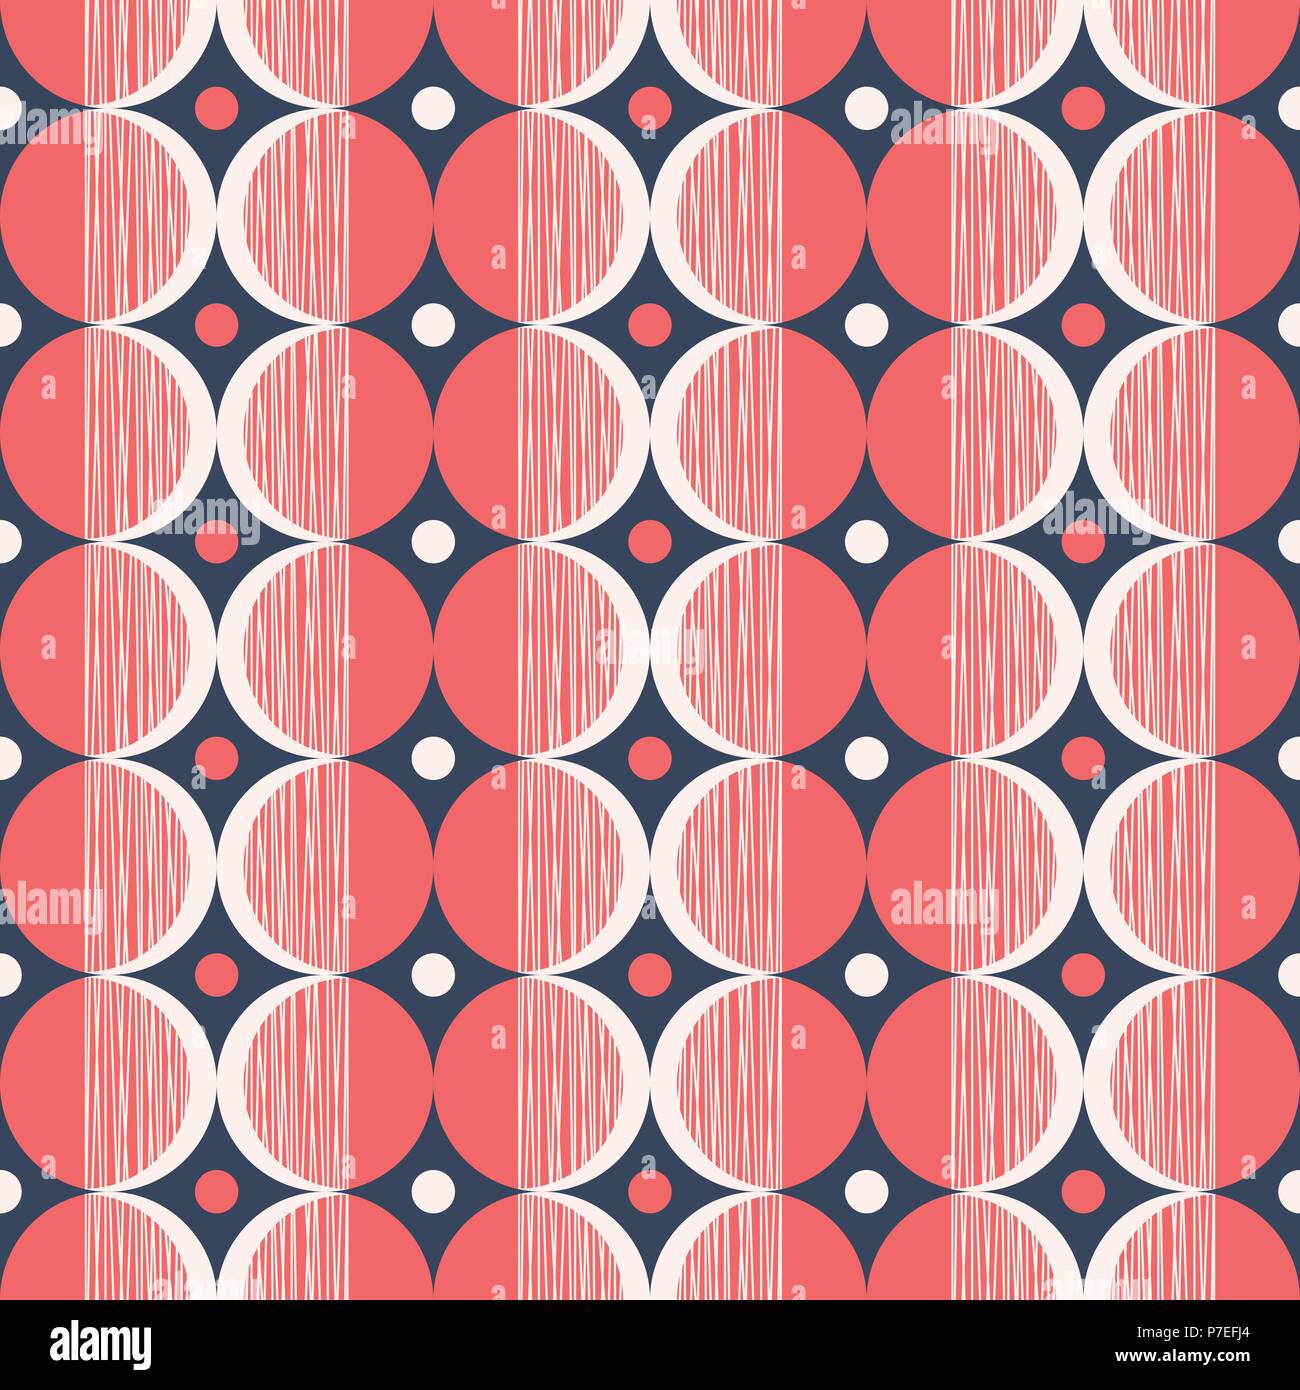 Retro Mod Style Vector Seamless Pattern with Red and Cream Textured Circles on Dark Blue Background. Stylish Fresh Geometric Graphic Mid century print Stock Vector